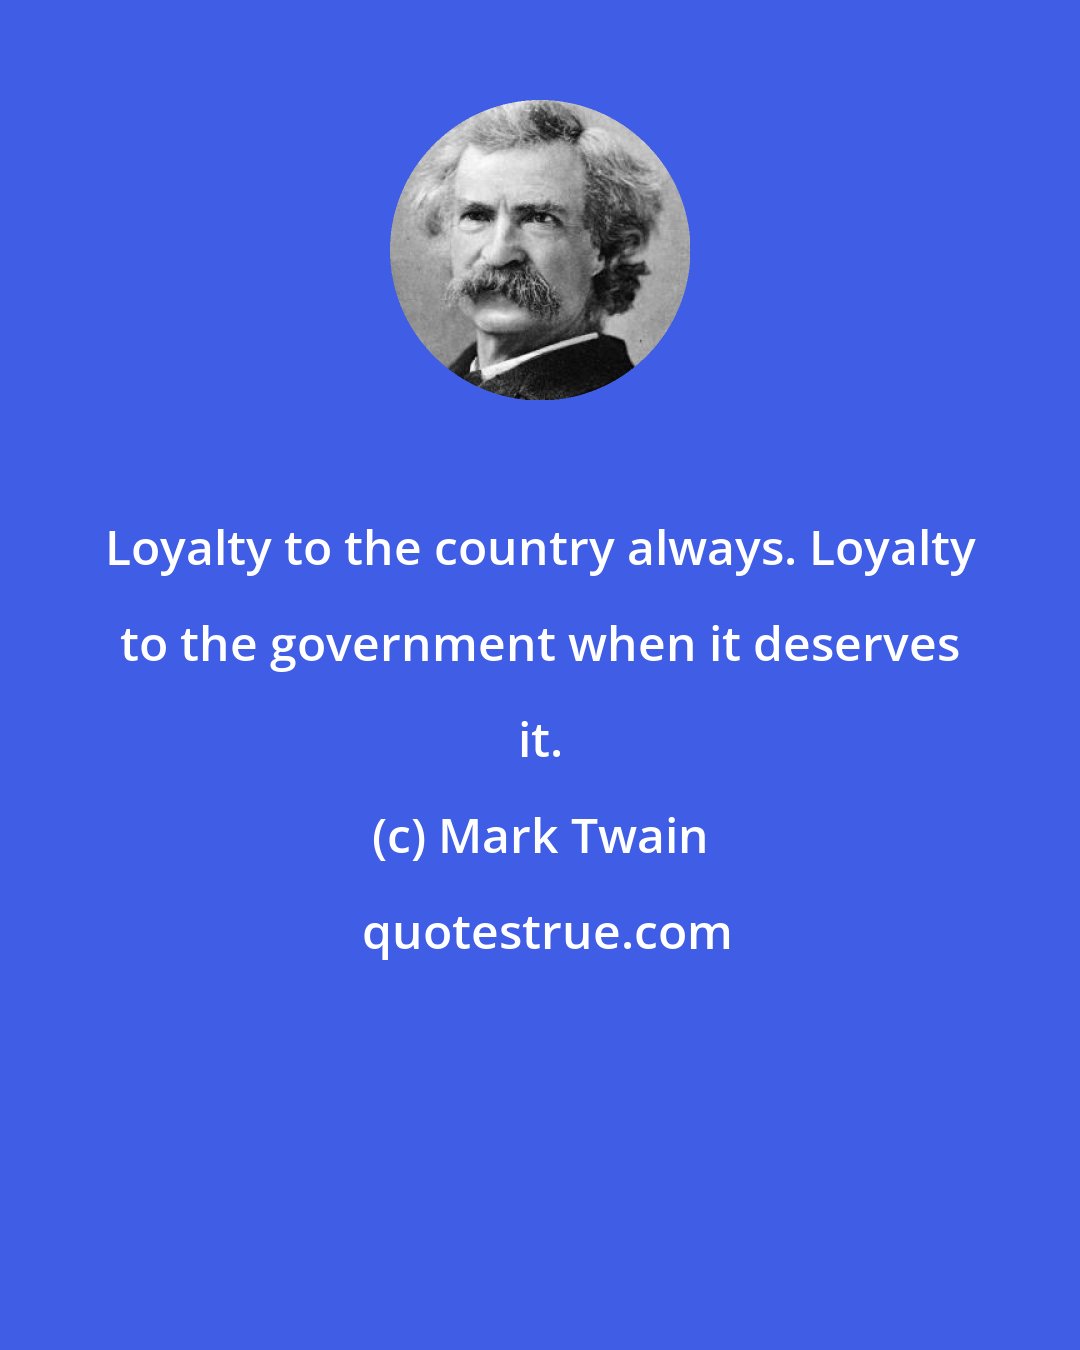 Mark Twain: Loyalty to the country always. Loyalty to the government when it deserves it.